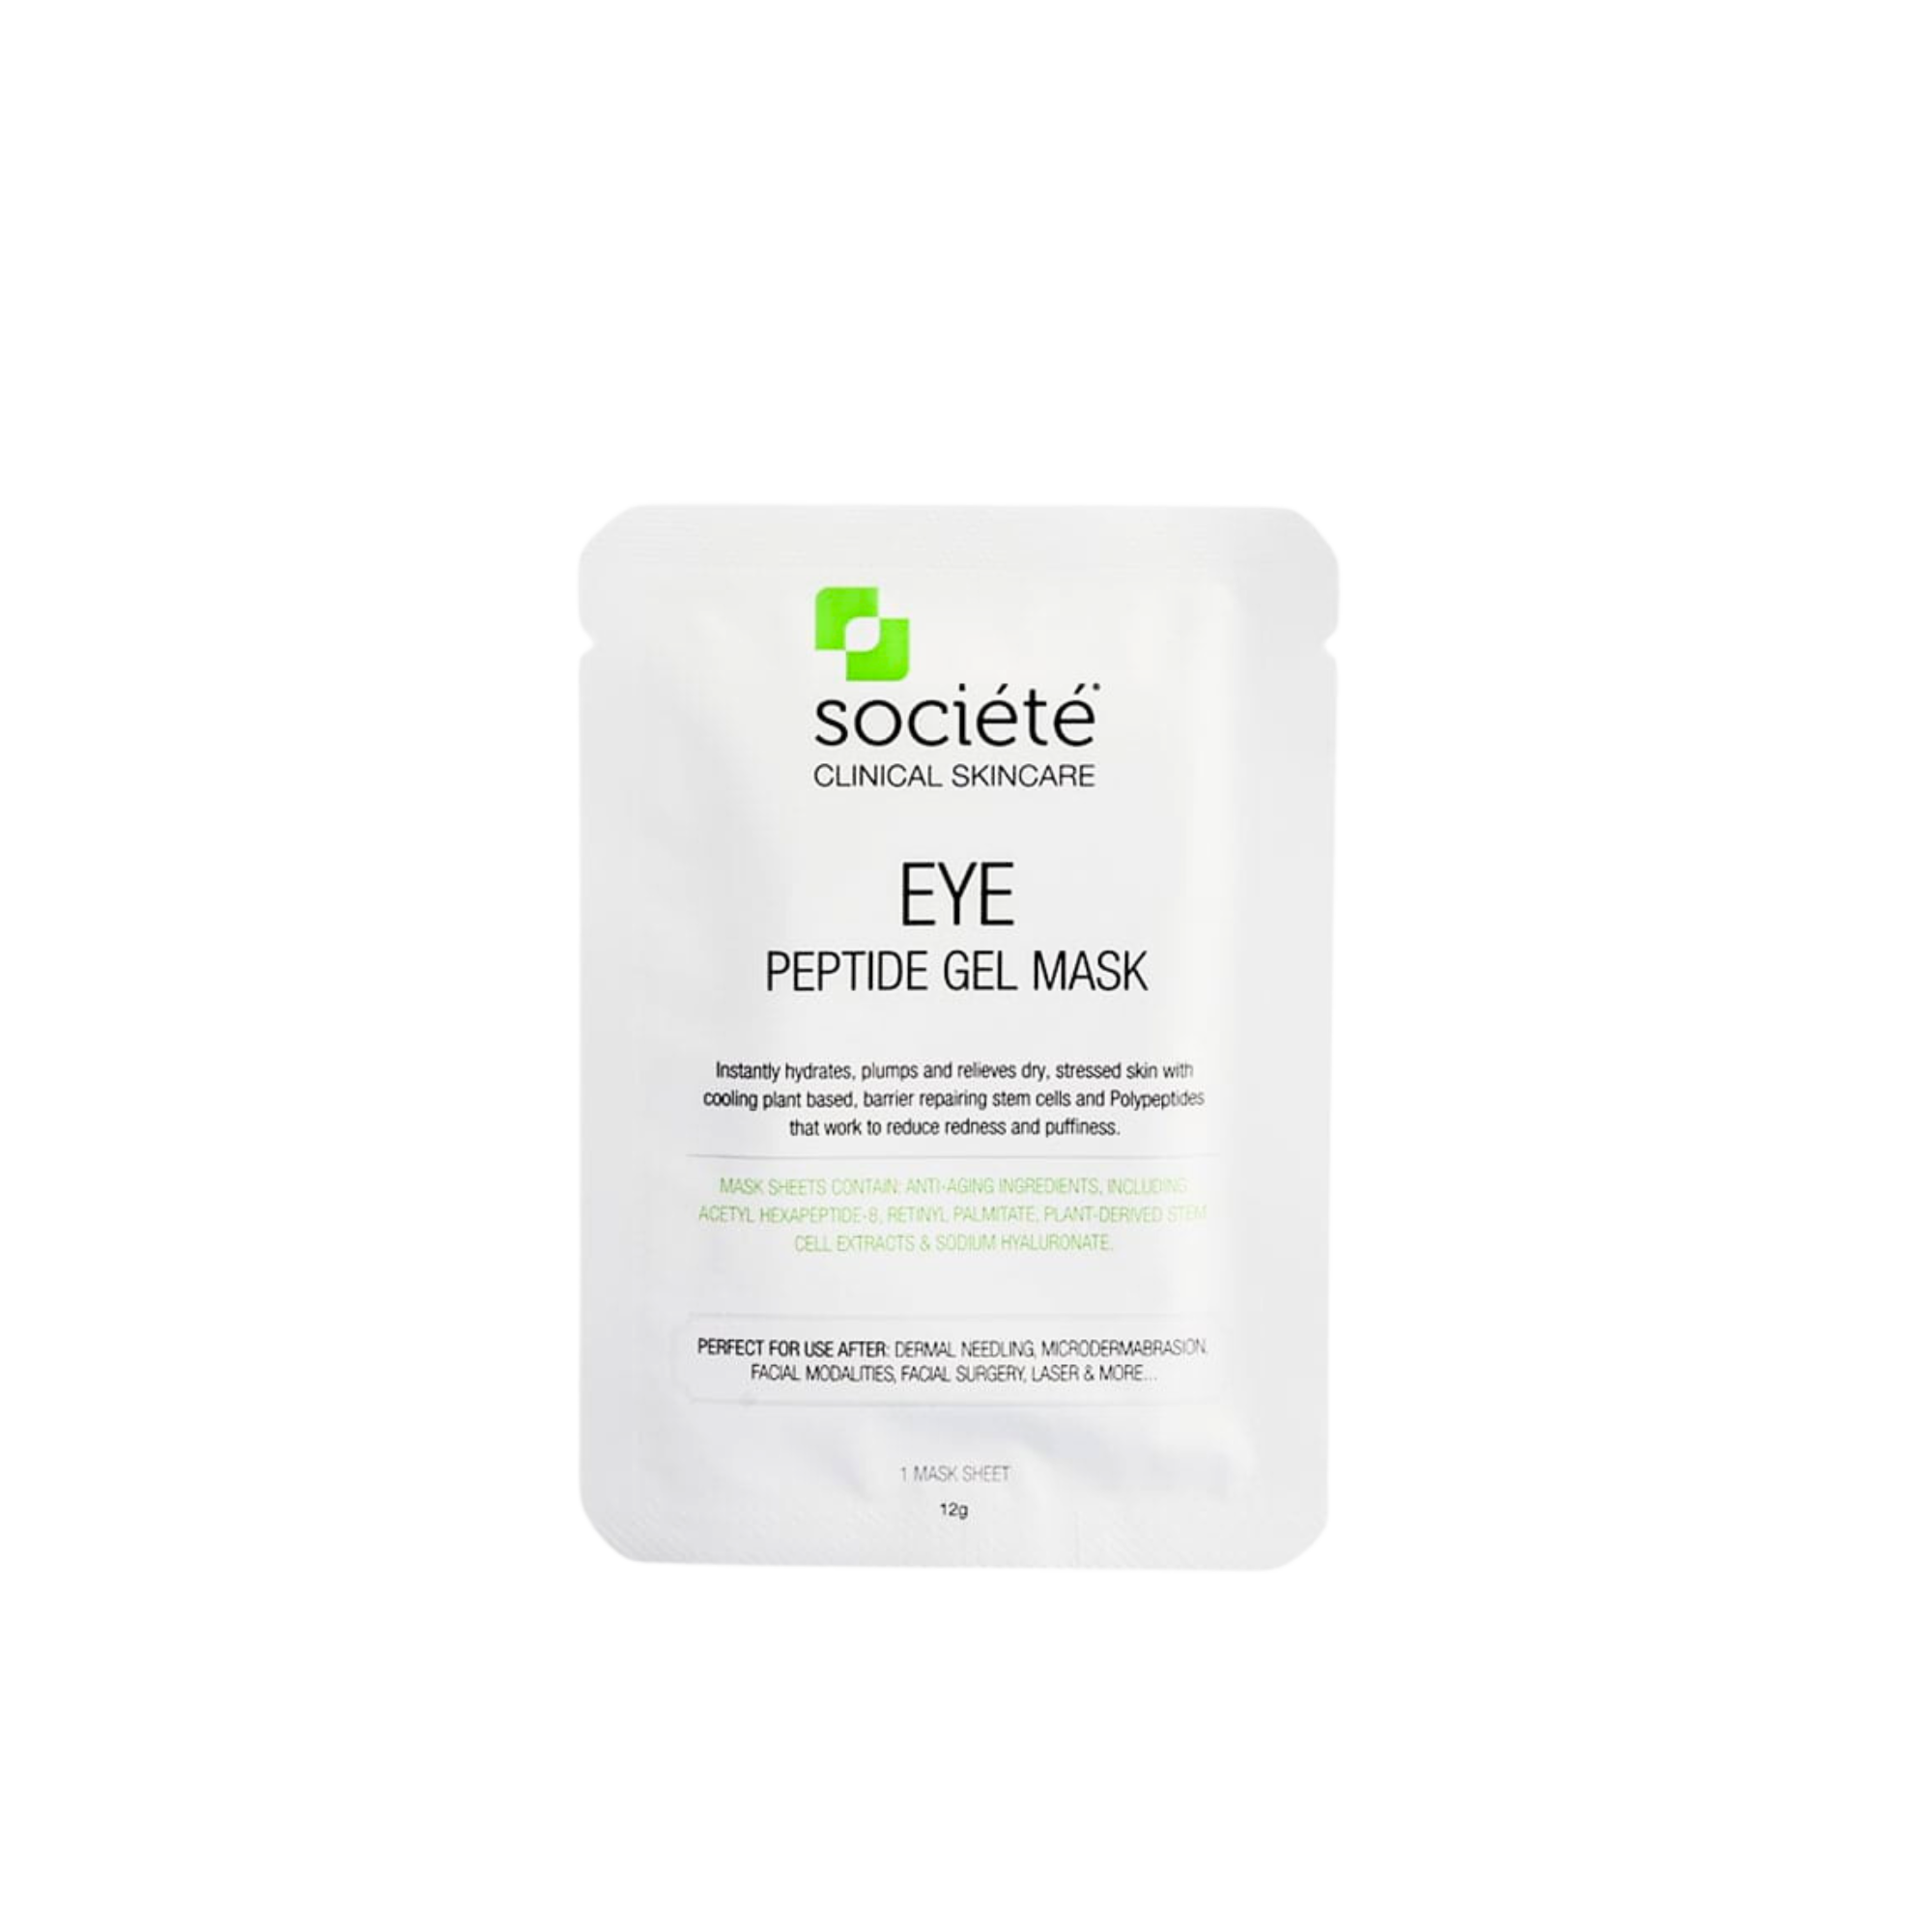 Eye Peptide Gel Mask (1 pair) | THE CLINIC